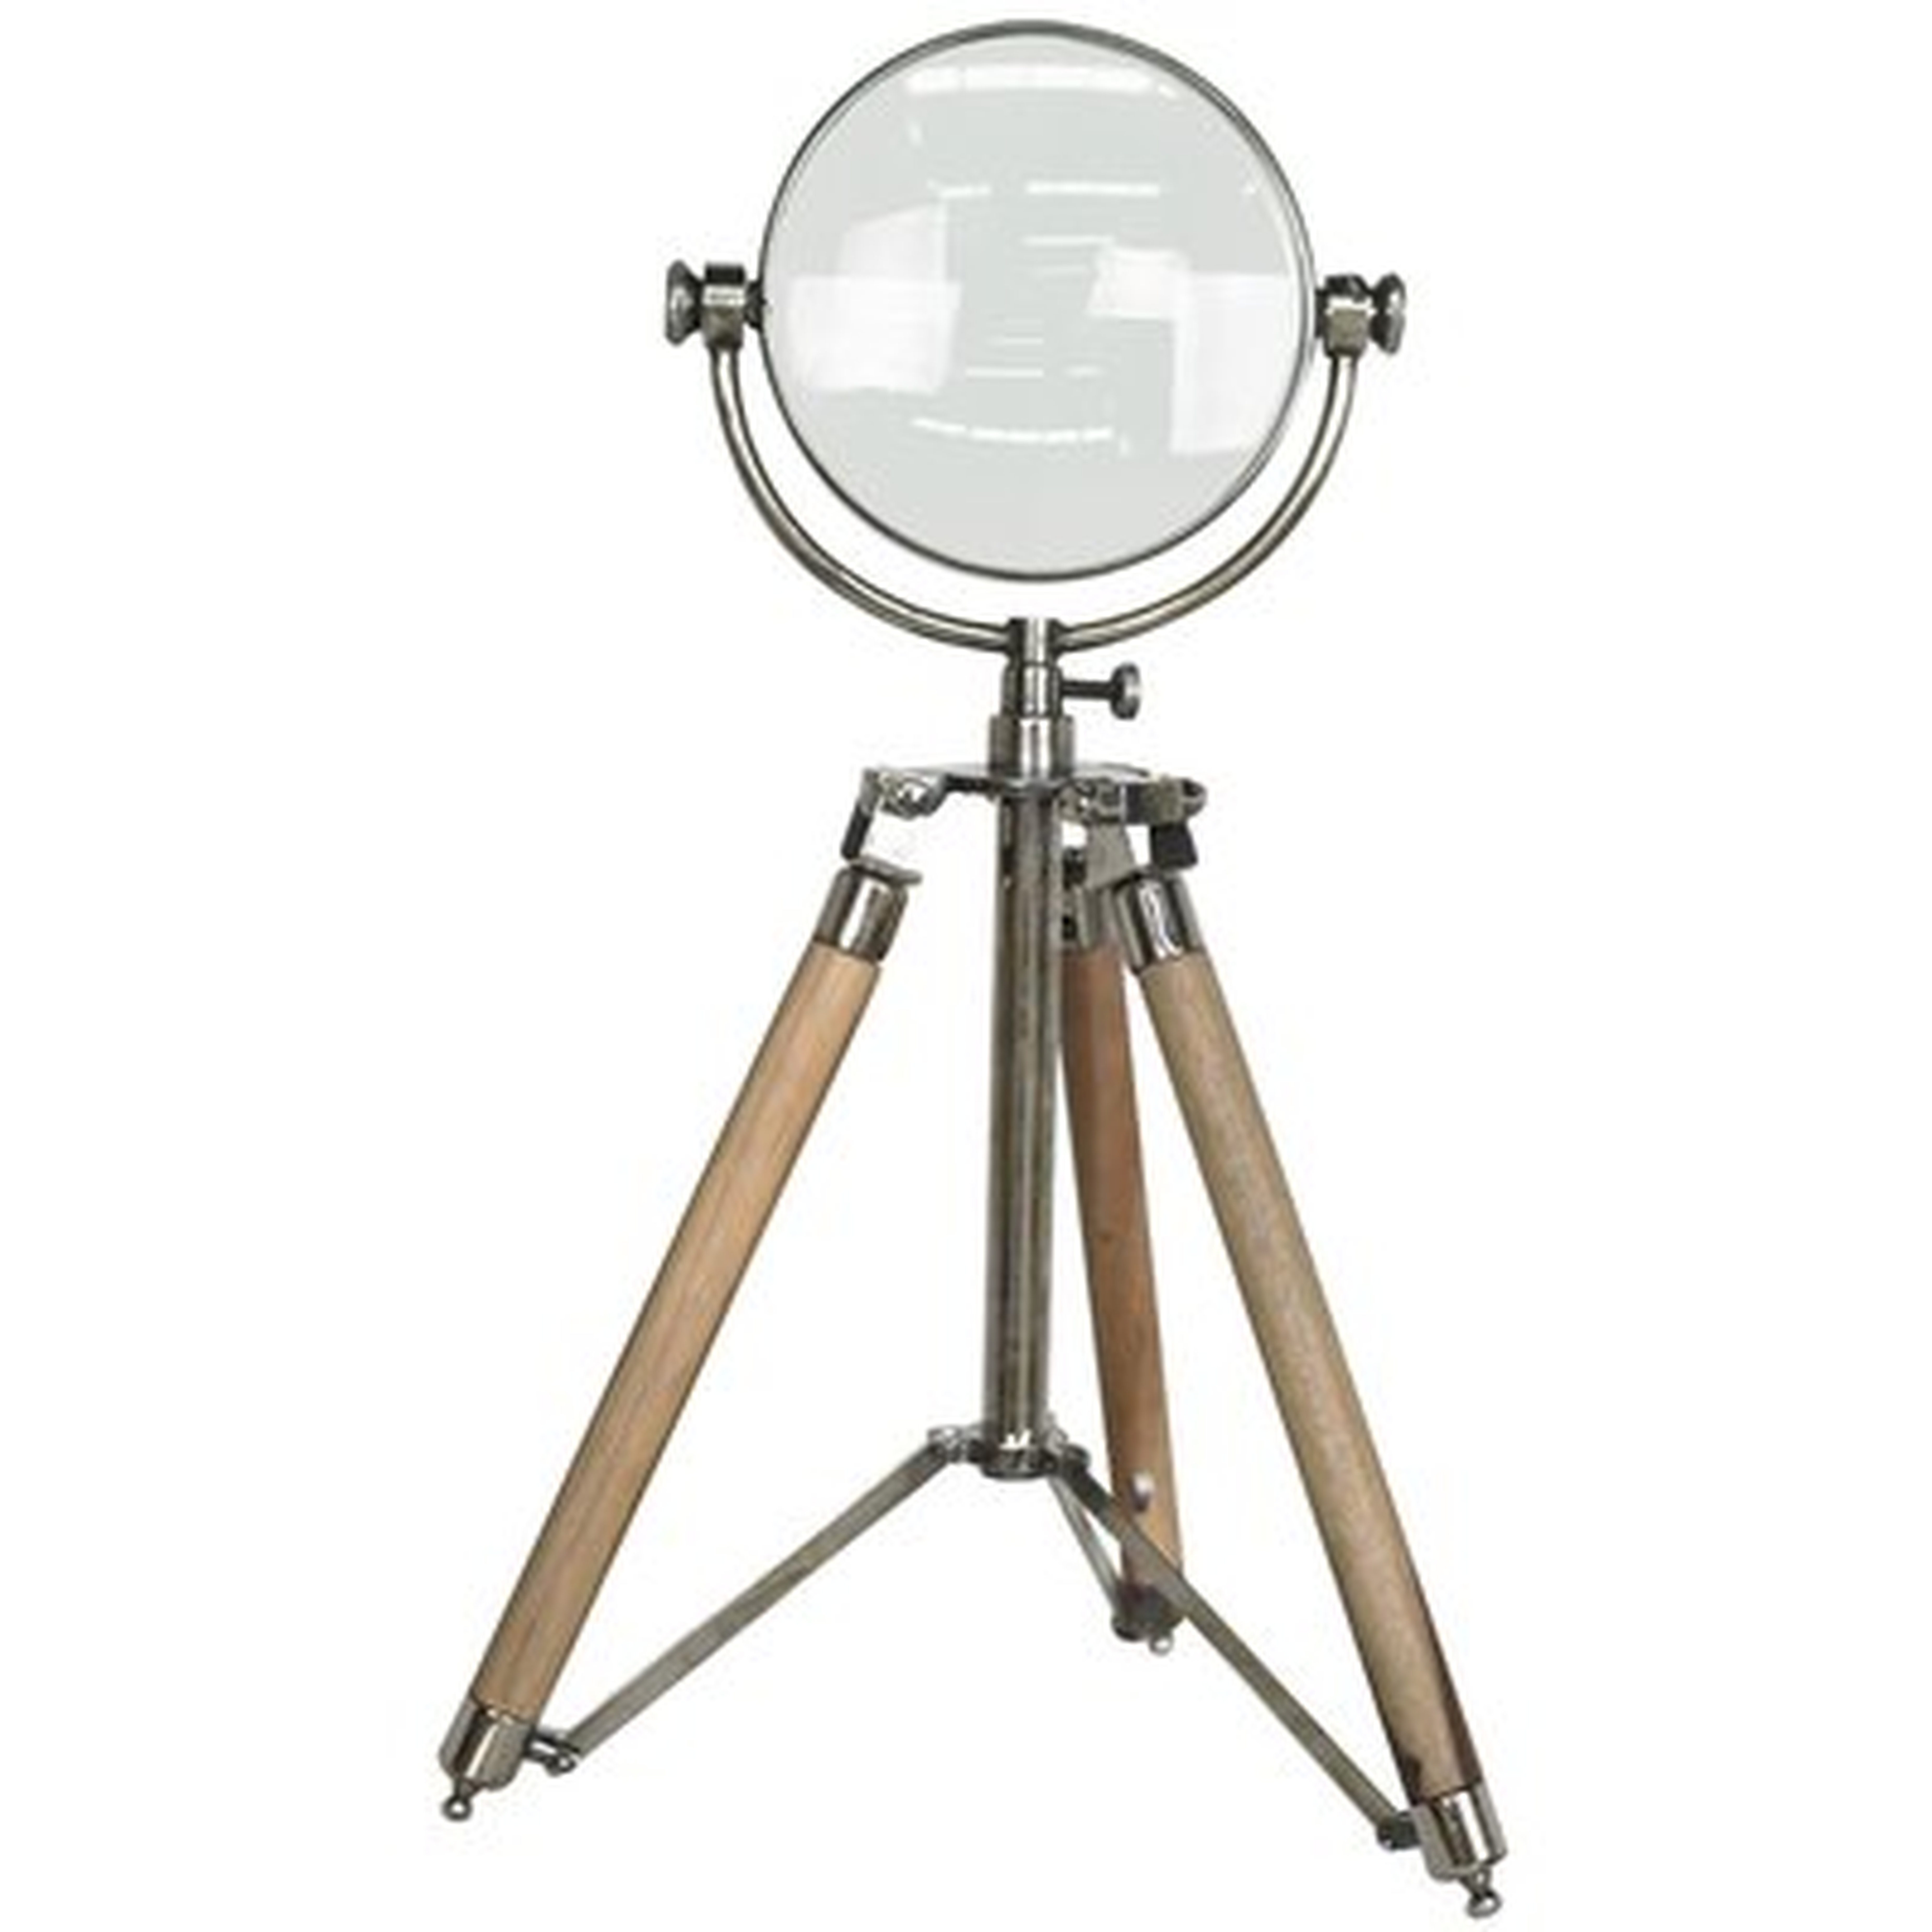 Lamarre Magnifying Glass With Tripod - Wayfair